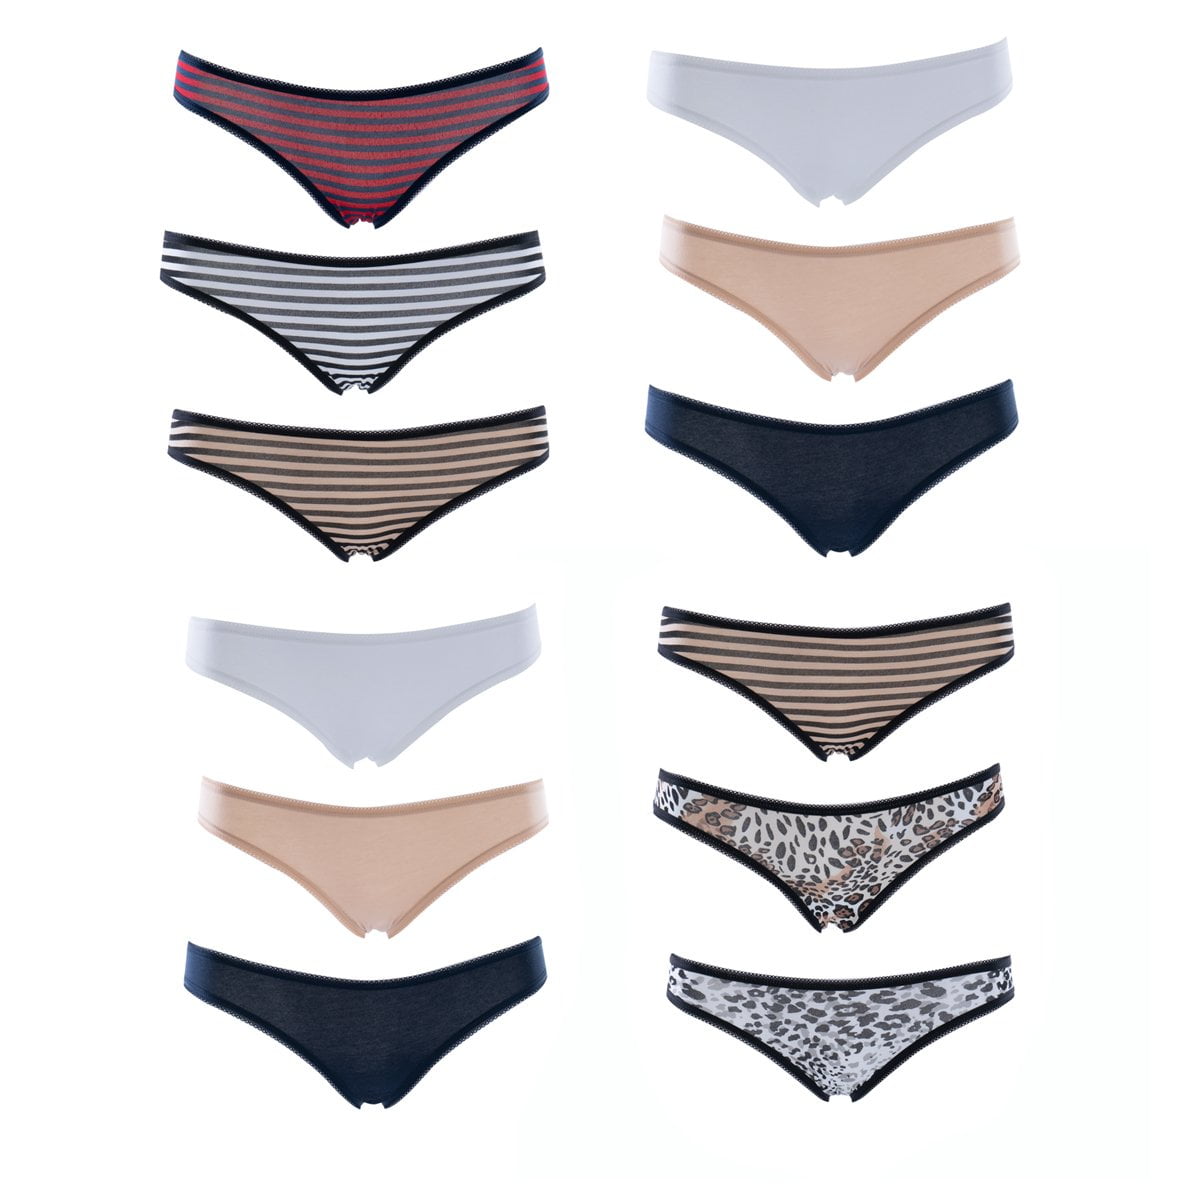 5 Pack Assorted Colors Cotton-Spandex Fabric Womens underwear 7J1 Hipster Panties for Women 